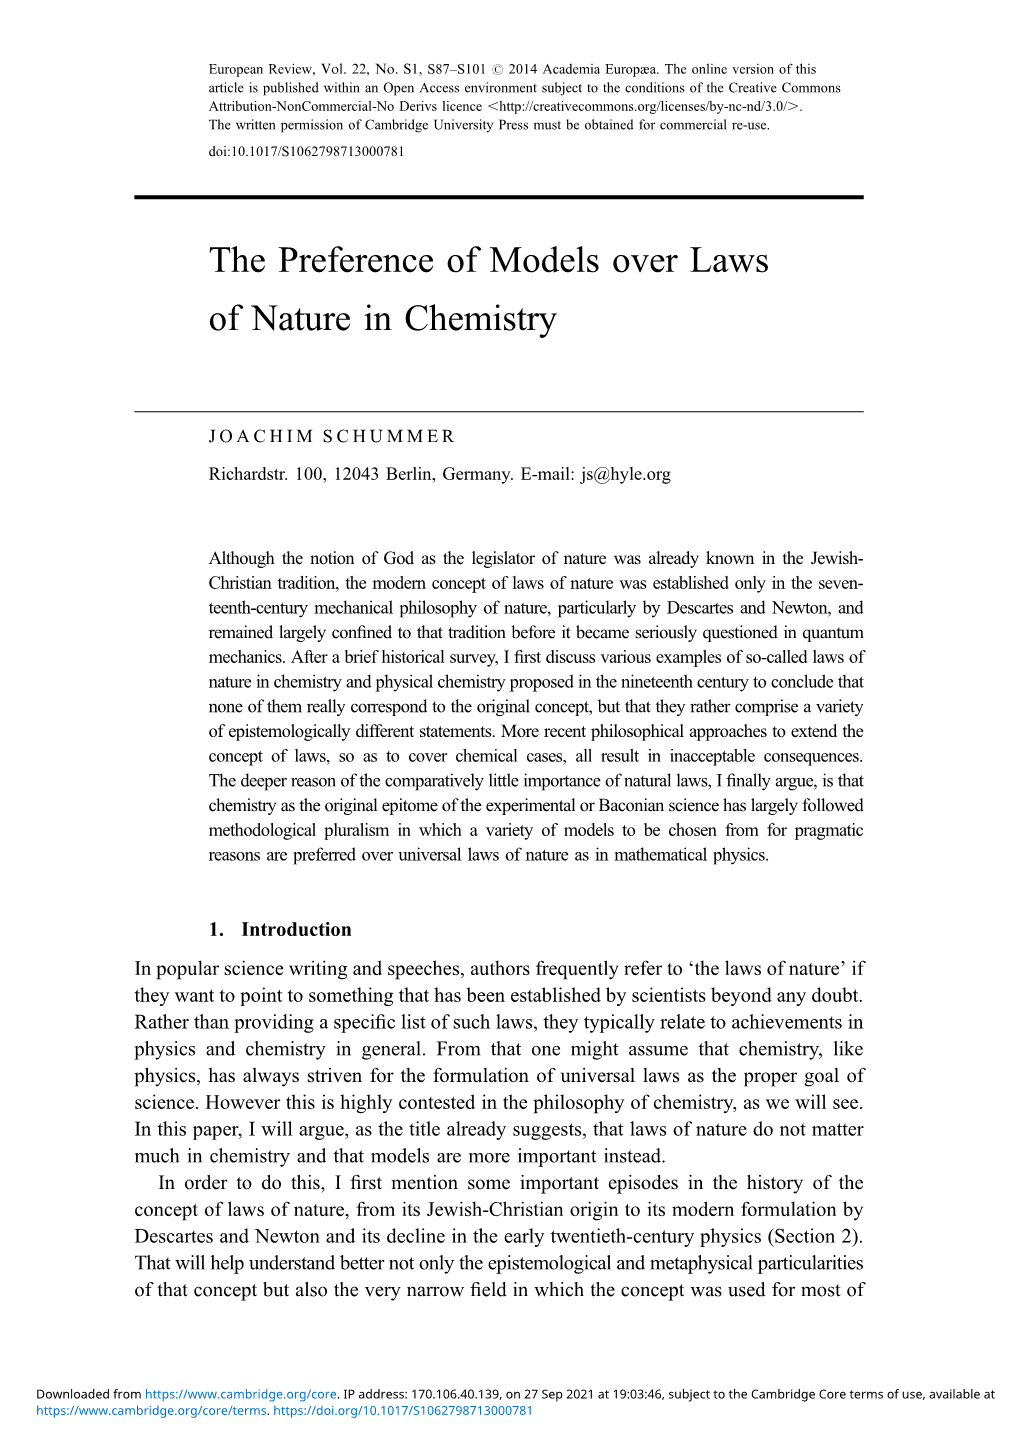 The Preference of Models Over Laws of Nature in Chemistry